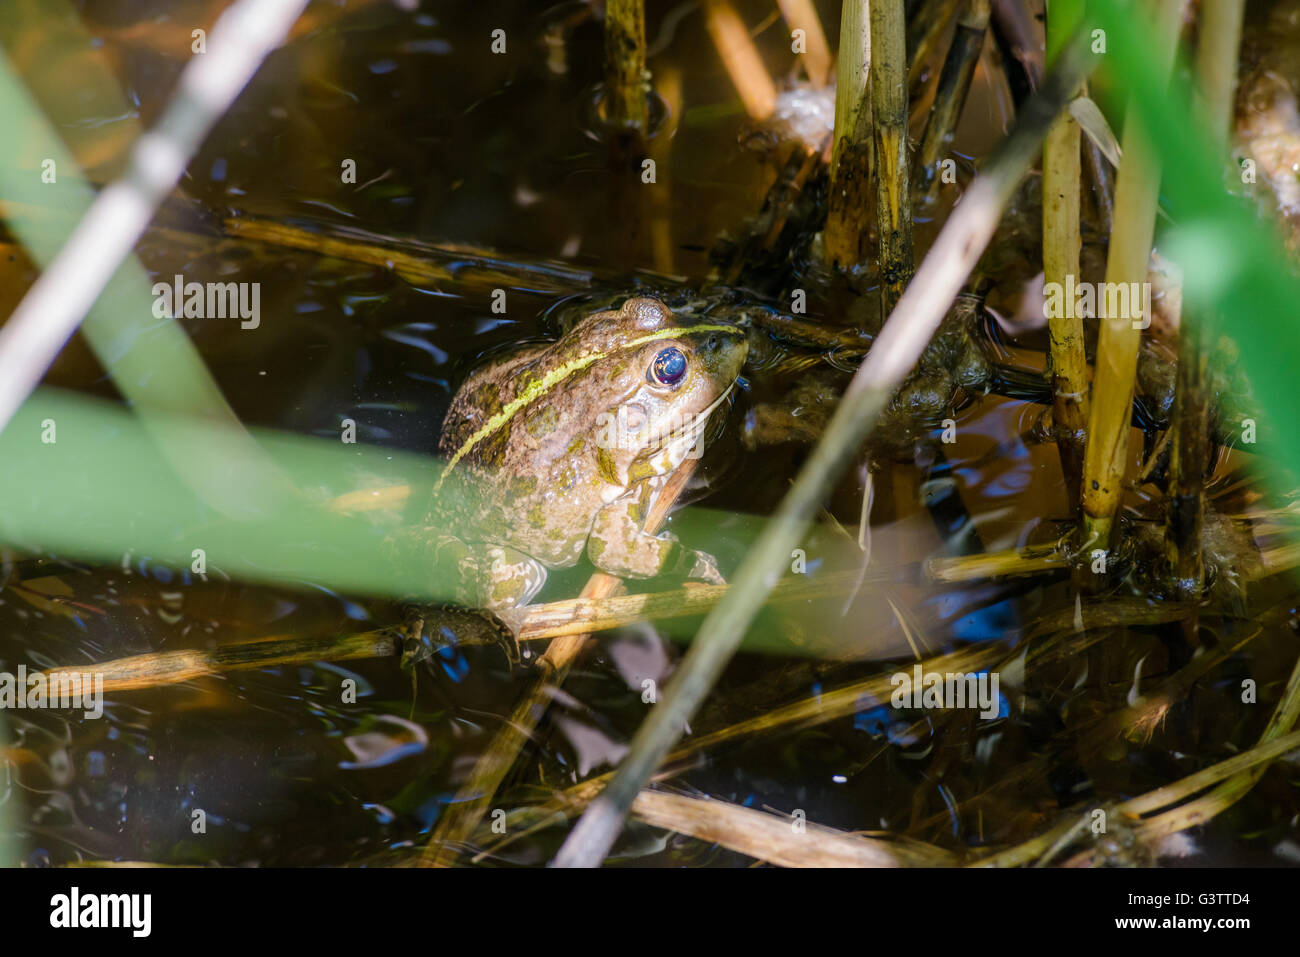 Close up of a green smiling frog hiding under the Typha Latifolia leaves in the lake Stock Photo